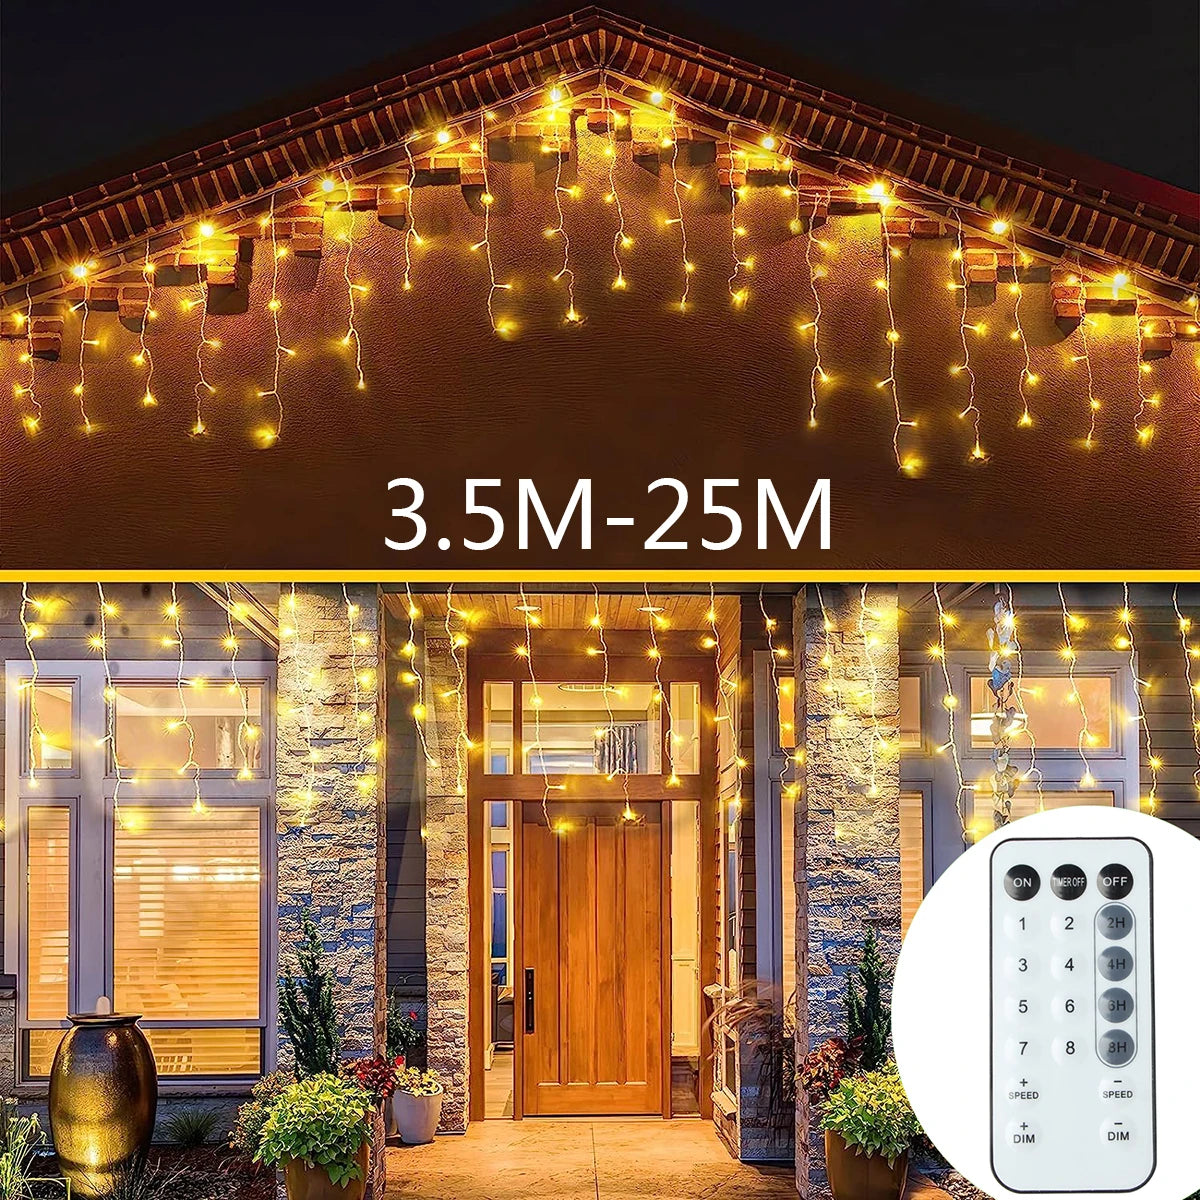 25M Icicle String Lights LED Fairy Lights Christmas Garland With Remote Control For New Year Party Wedding Garden Terrace Decor